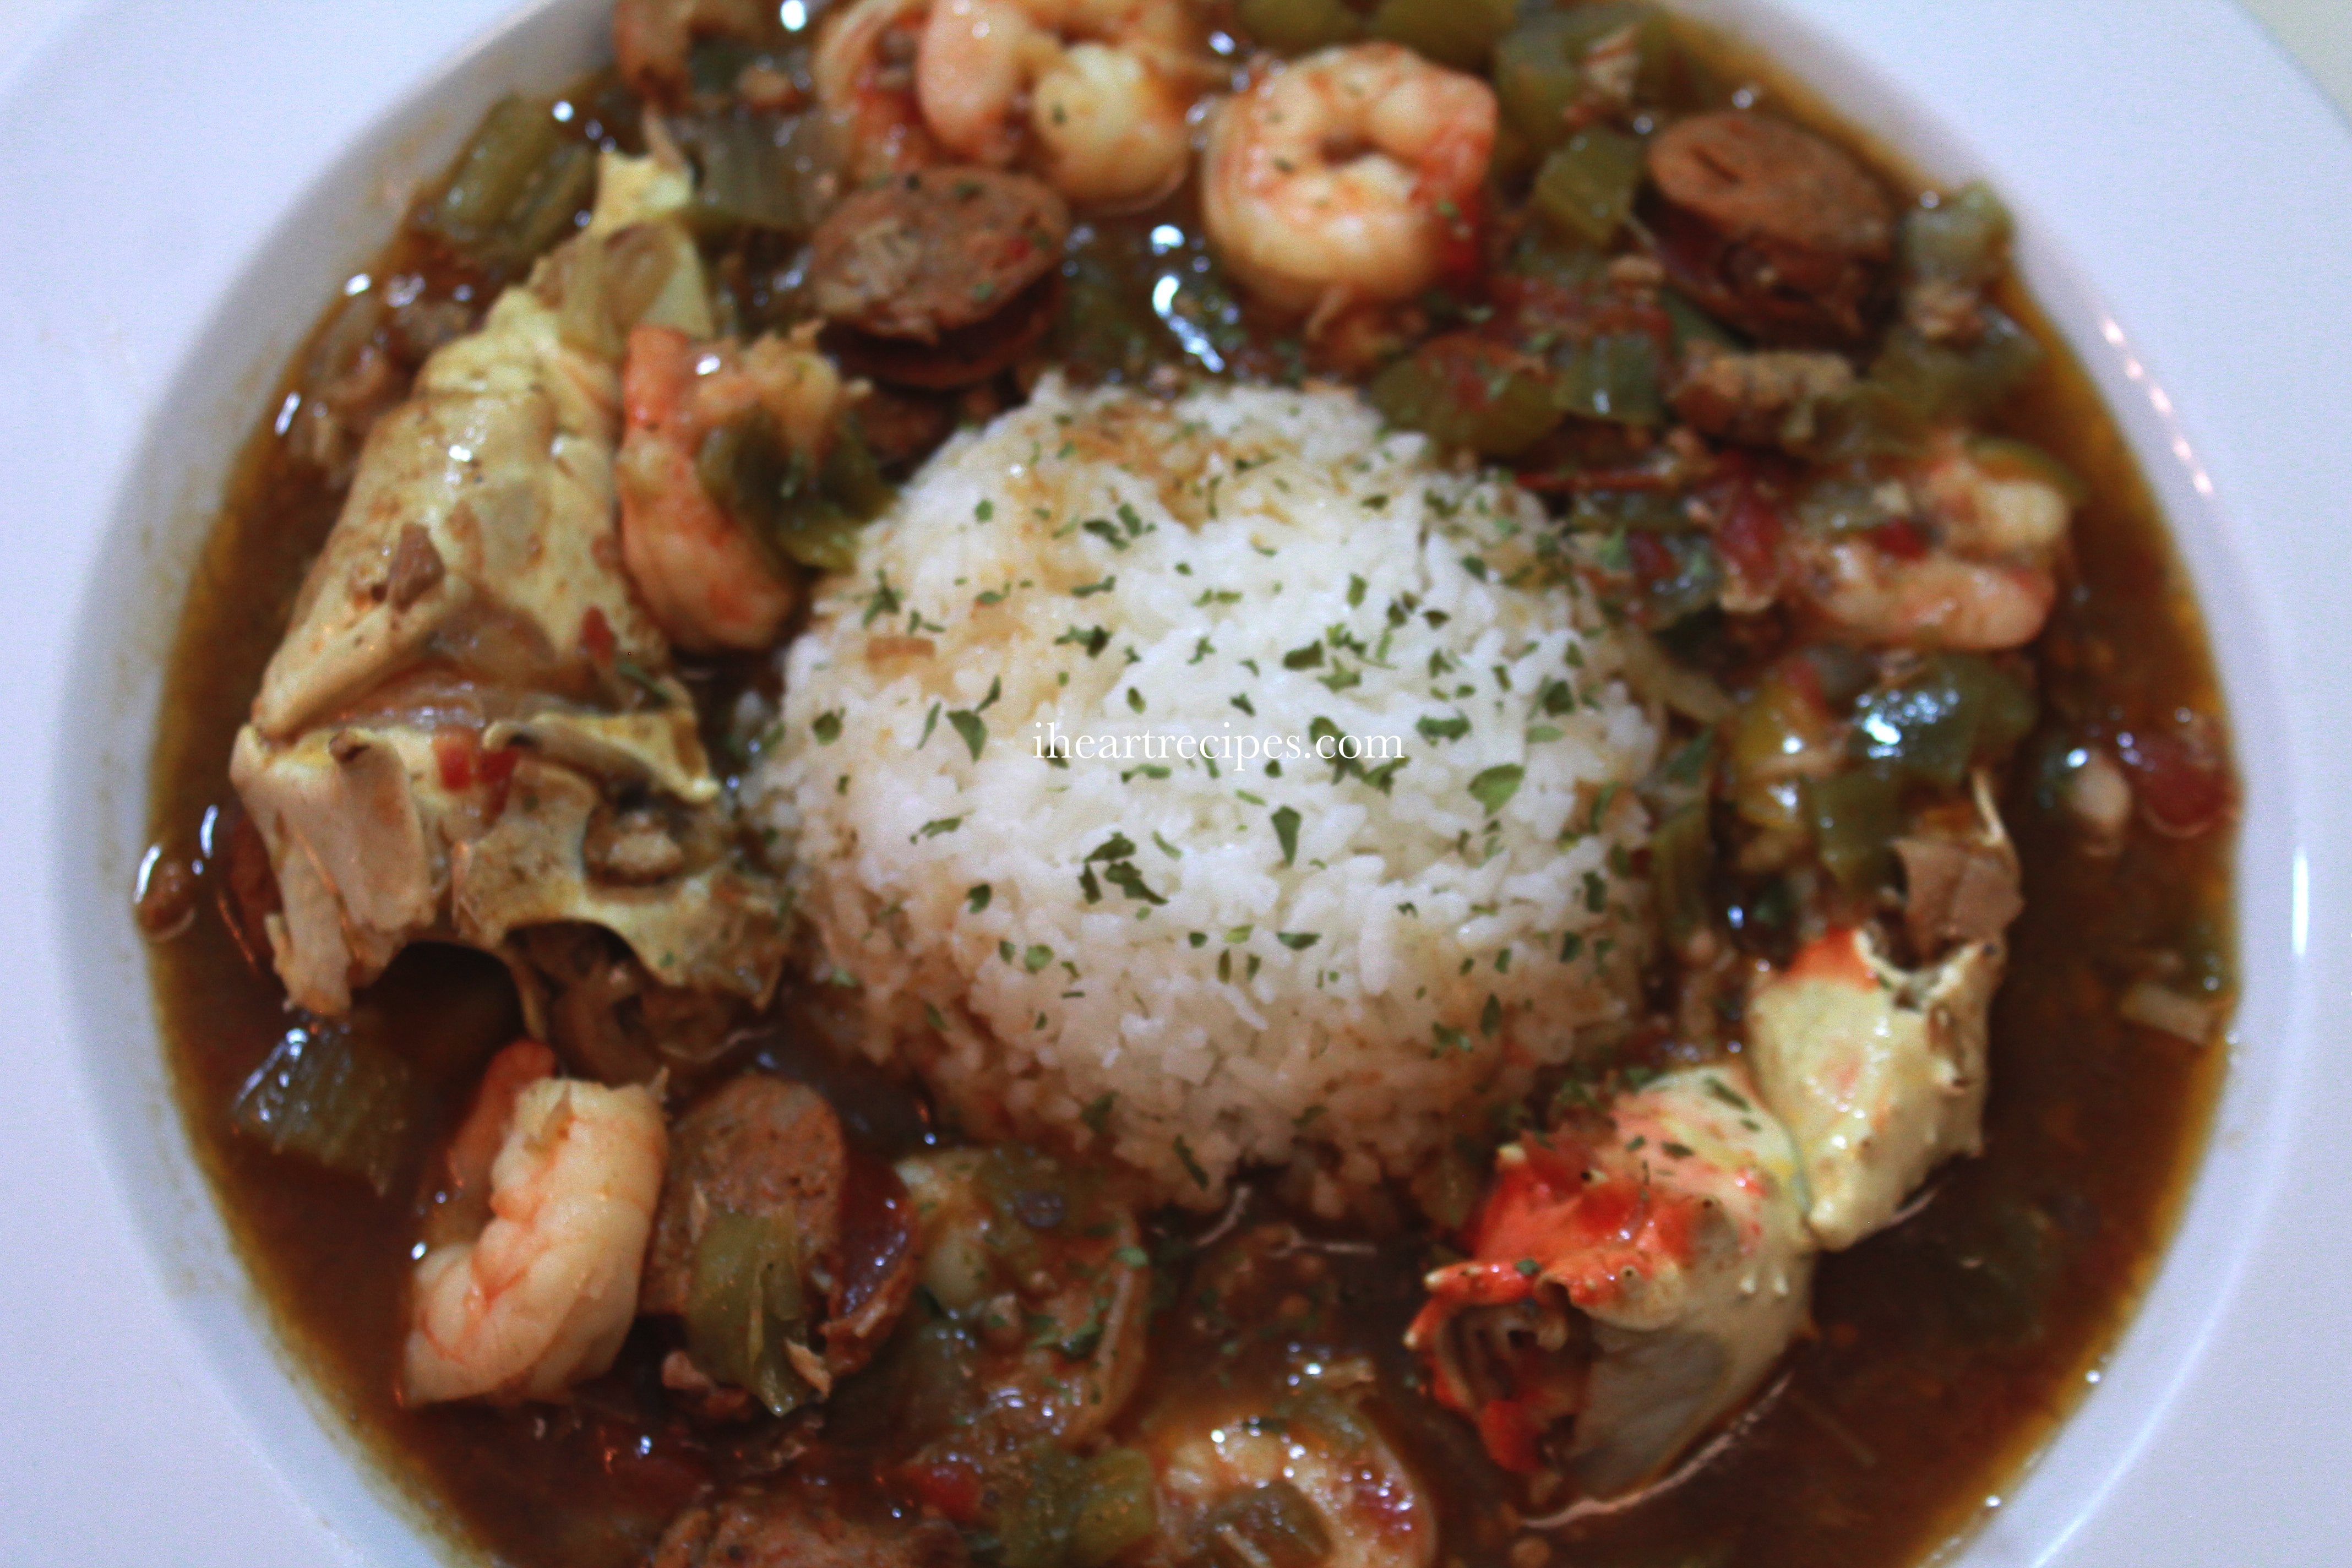 This amazing and hearty gumbo is a great choice